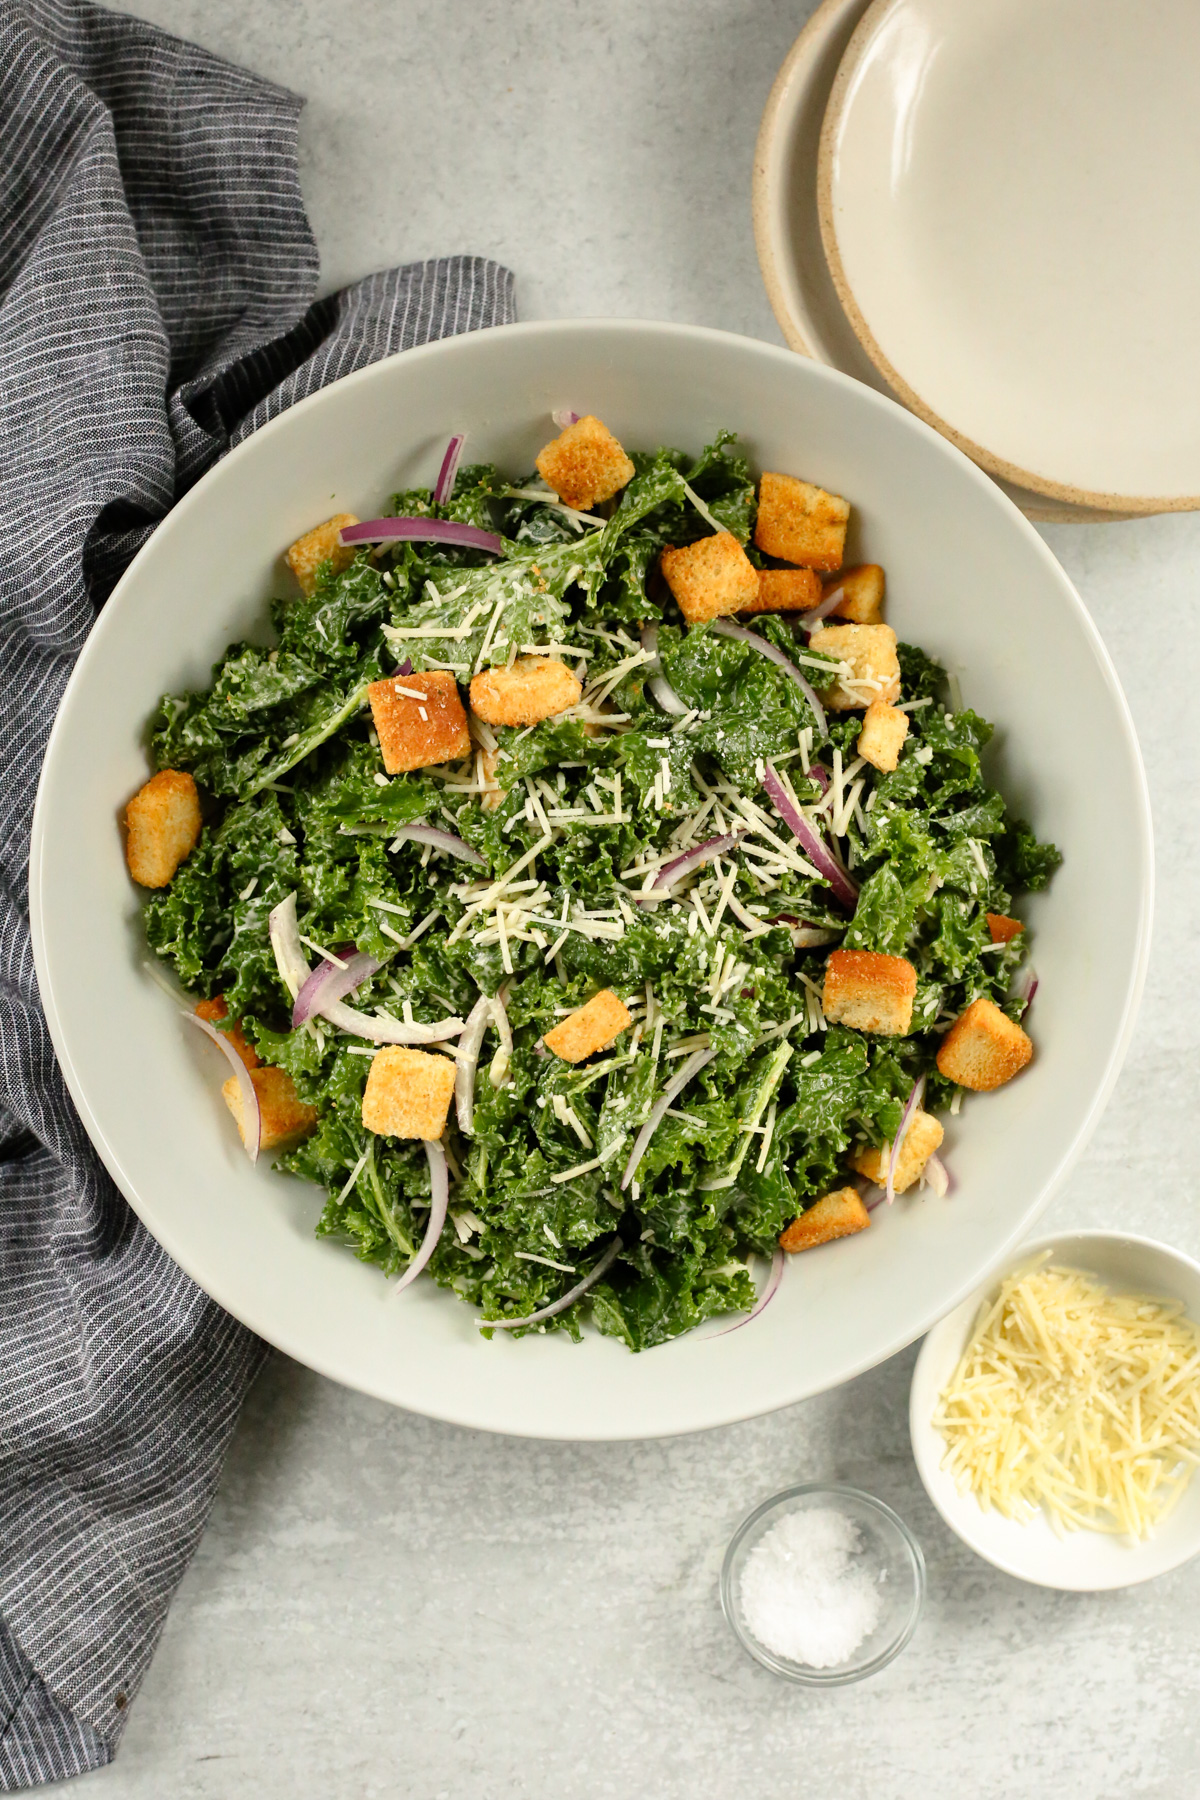 Overhead view of a large serving bowl containing a massaged kale caesar salad, topped with shredded parmesan cheese and golden brown croutons, with small salad plates arranged nearby as if preparing to serve the salad